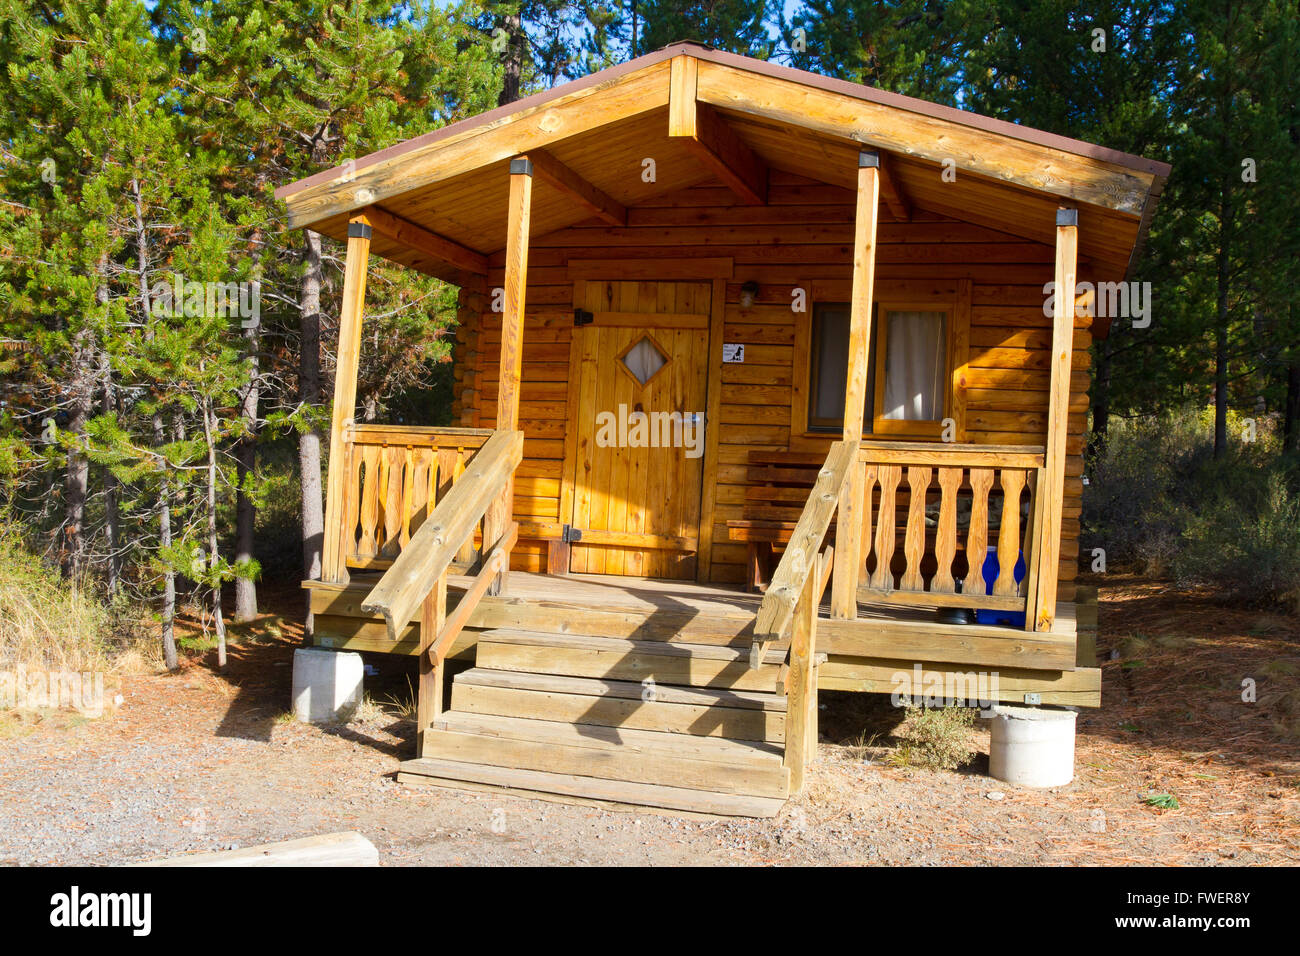 A rustic log cabin lodge building in the woods at an outdoors camping park facility.f Stock Photo